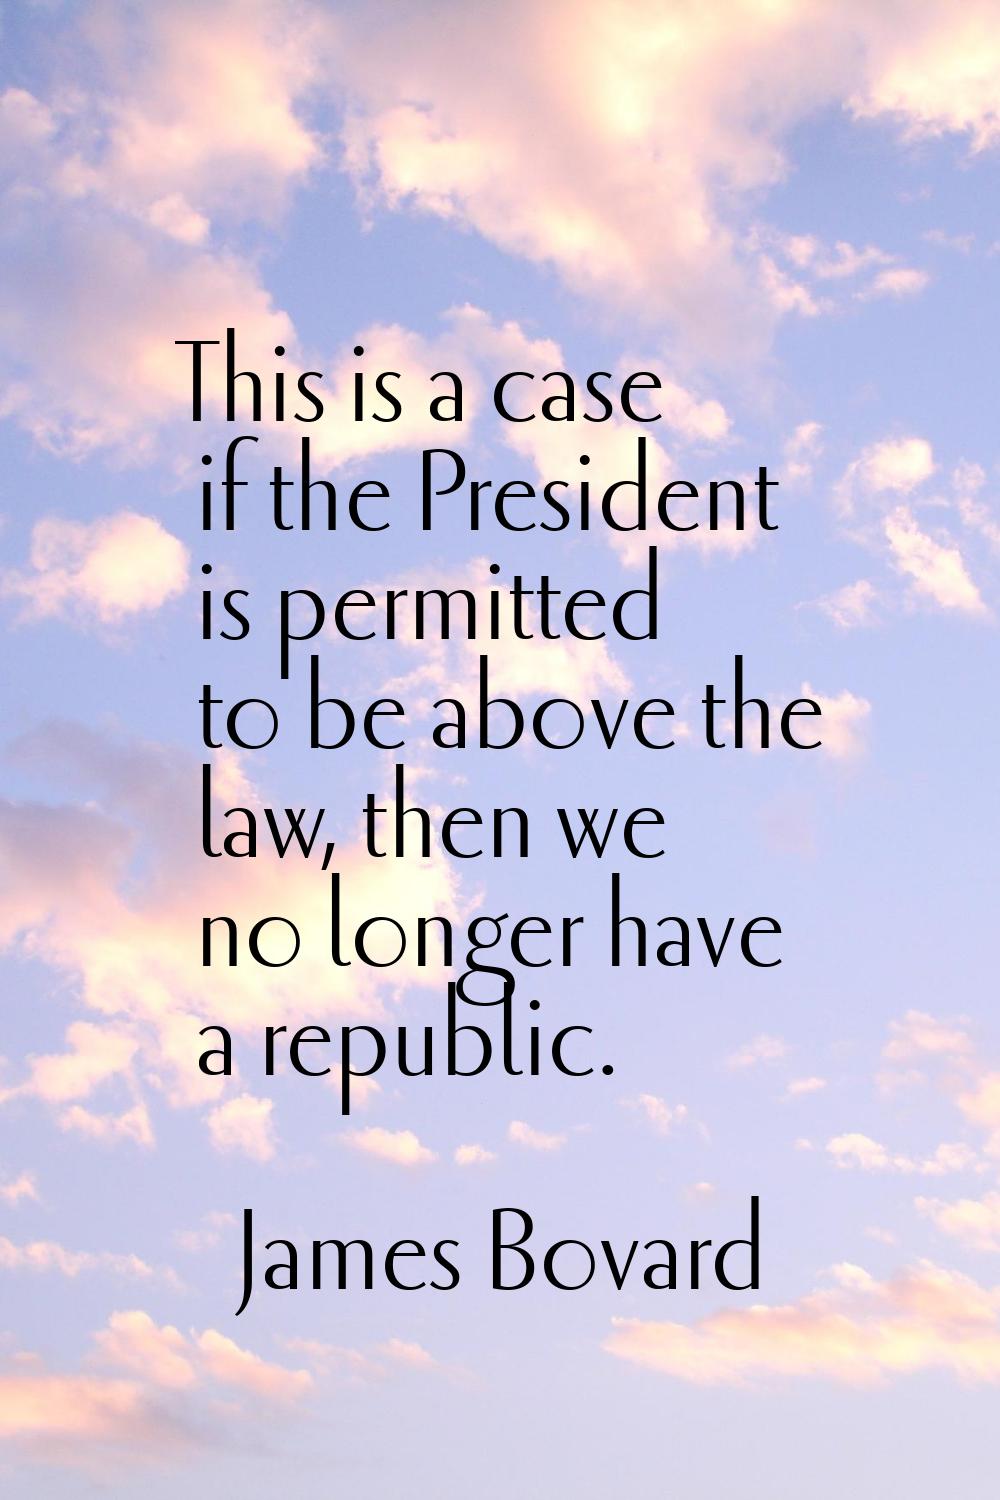 This is a case if the President is permitted to be above the law, then we no longer have a republic